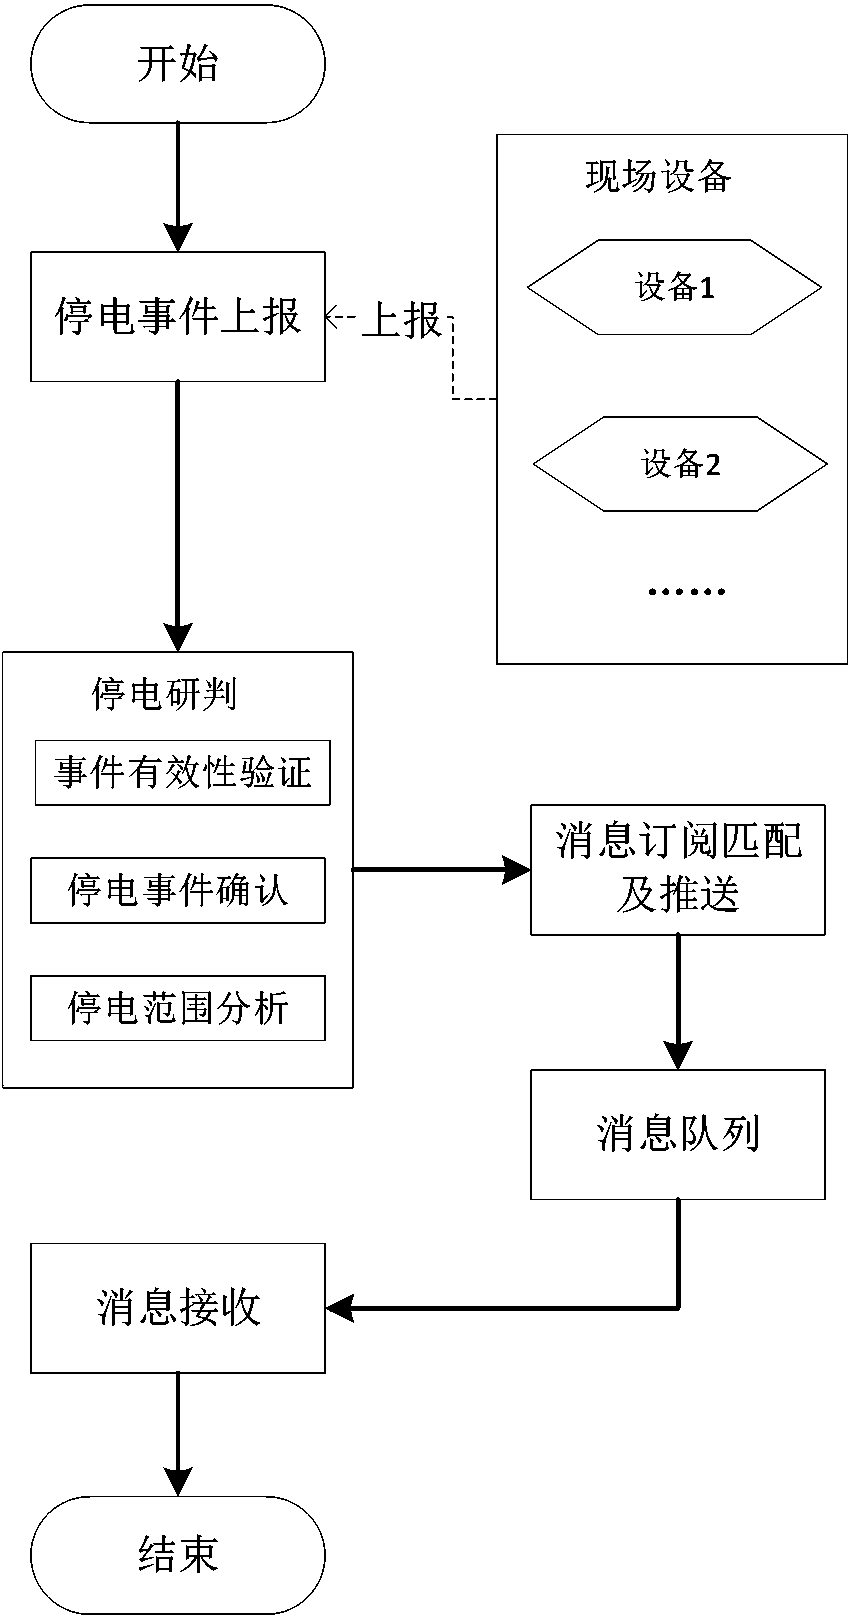 Power failure data sharing method based on cloud platform computing and message bus technology